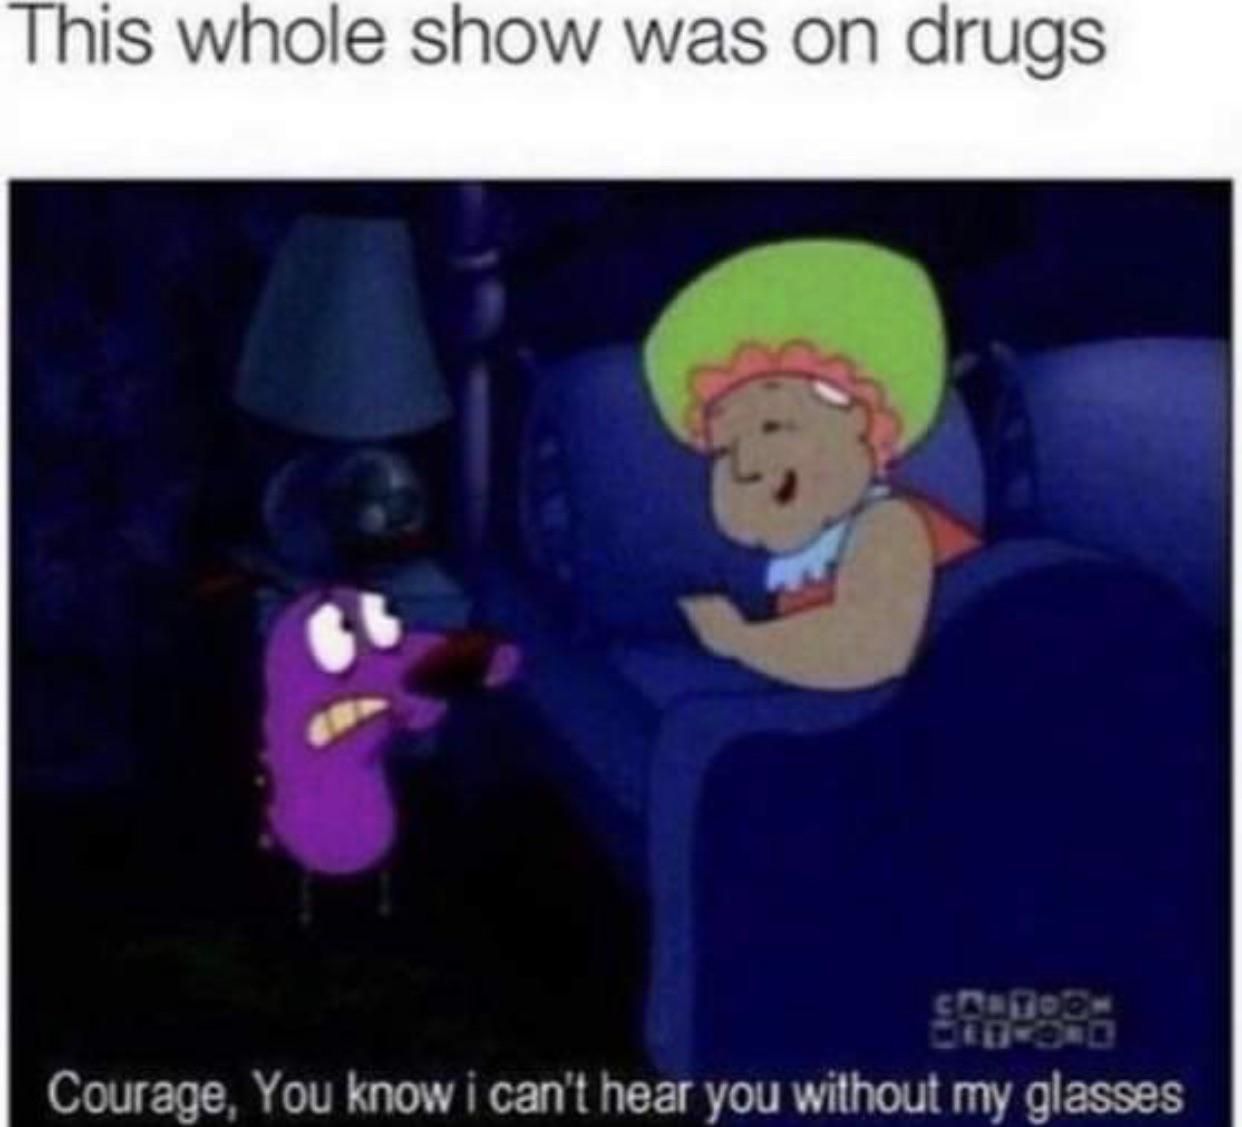 Courage on drugs